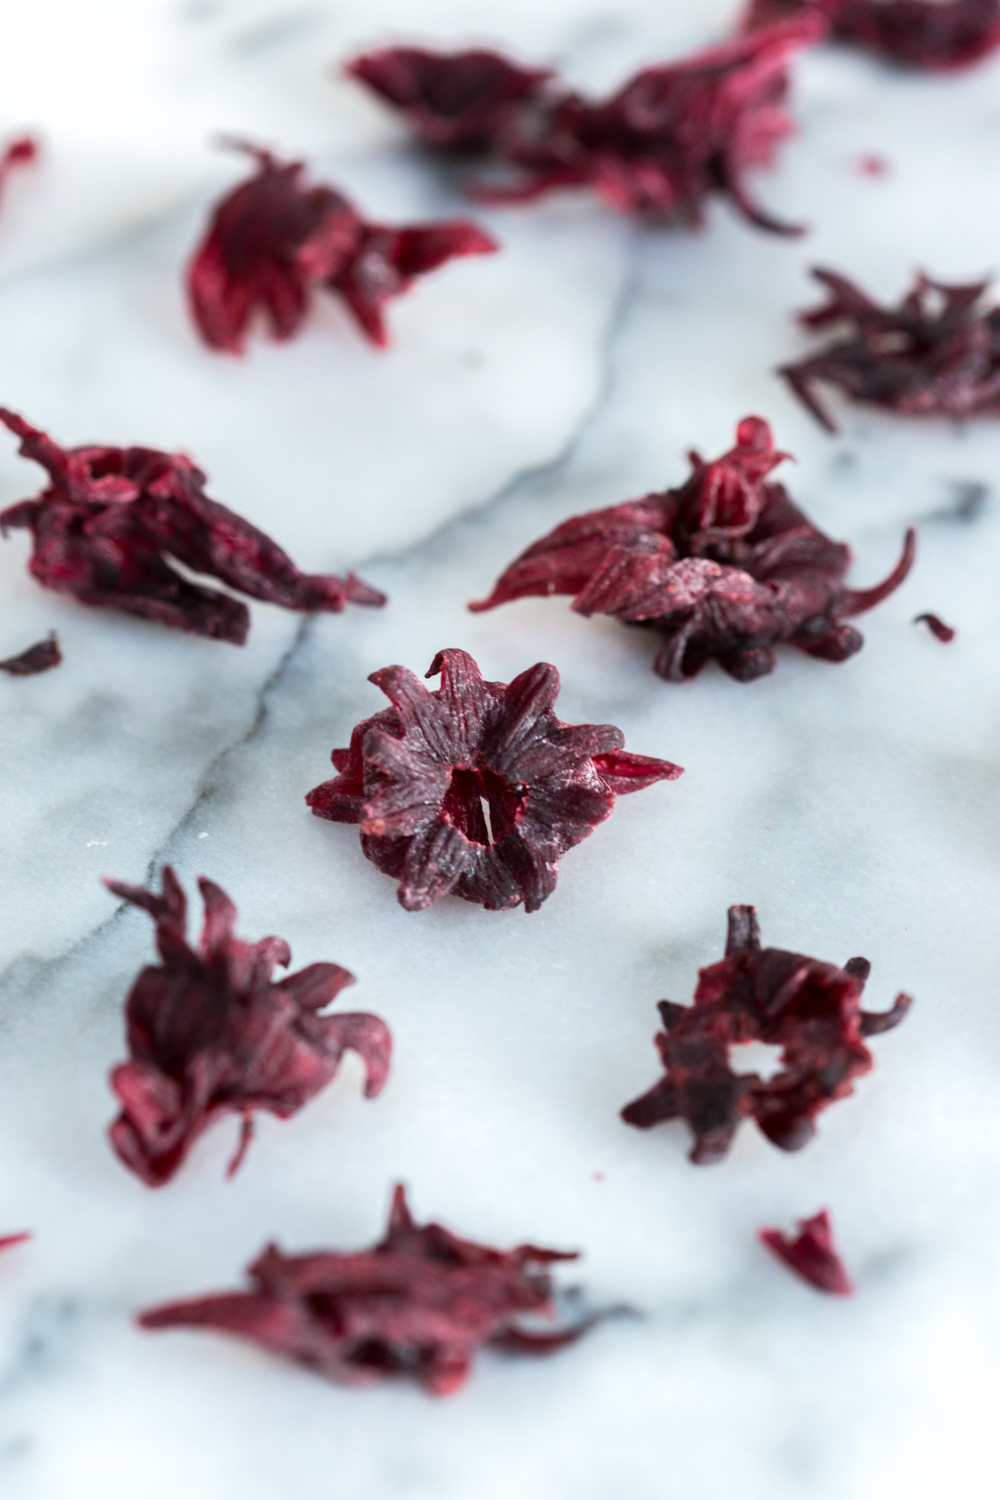 Dried hibiscus flowers for Glazed Hibiscus Shortbread Cookies